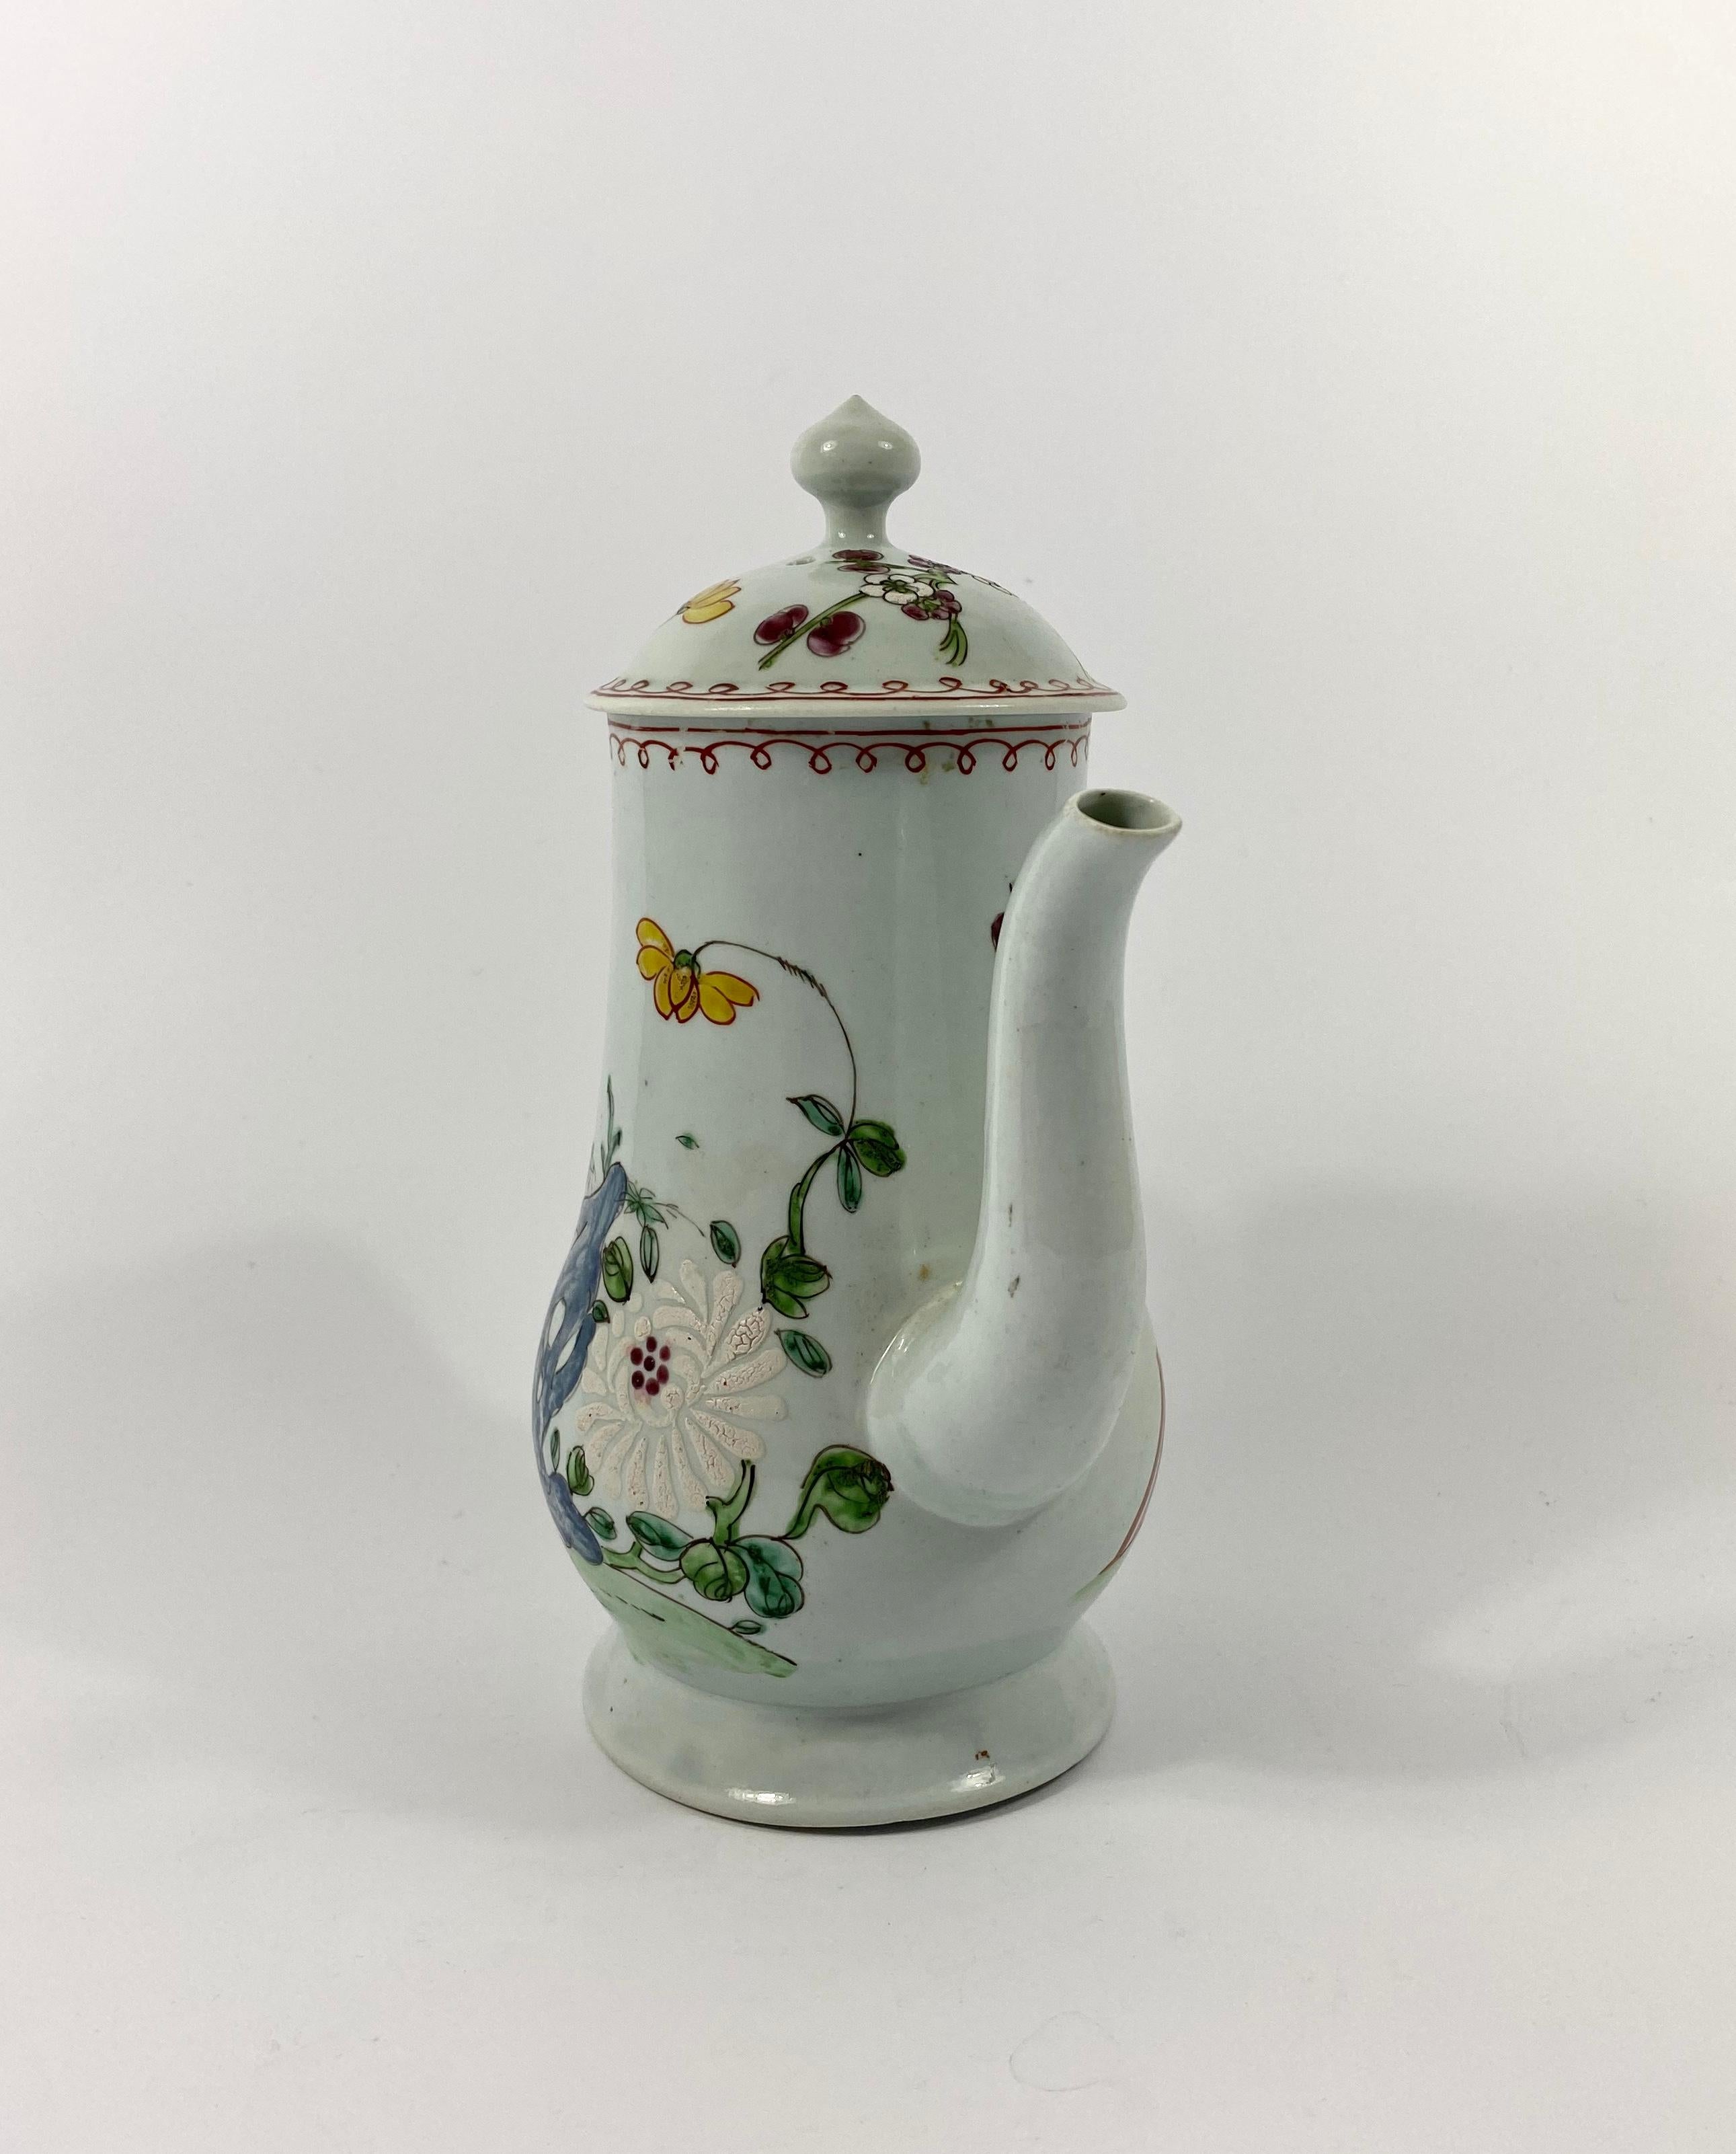 A fine and rare Richard Chaffers of Liverpool porcelain coffee pot and cover, circa 1758. The thinly potted and elegant small sized pot, hand painted in vibrant enamels, with flowering plants amongst rocks, and a fence, in Chinese Famille rose